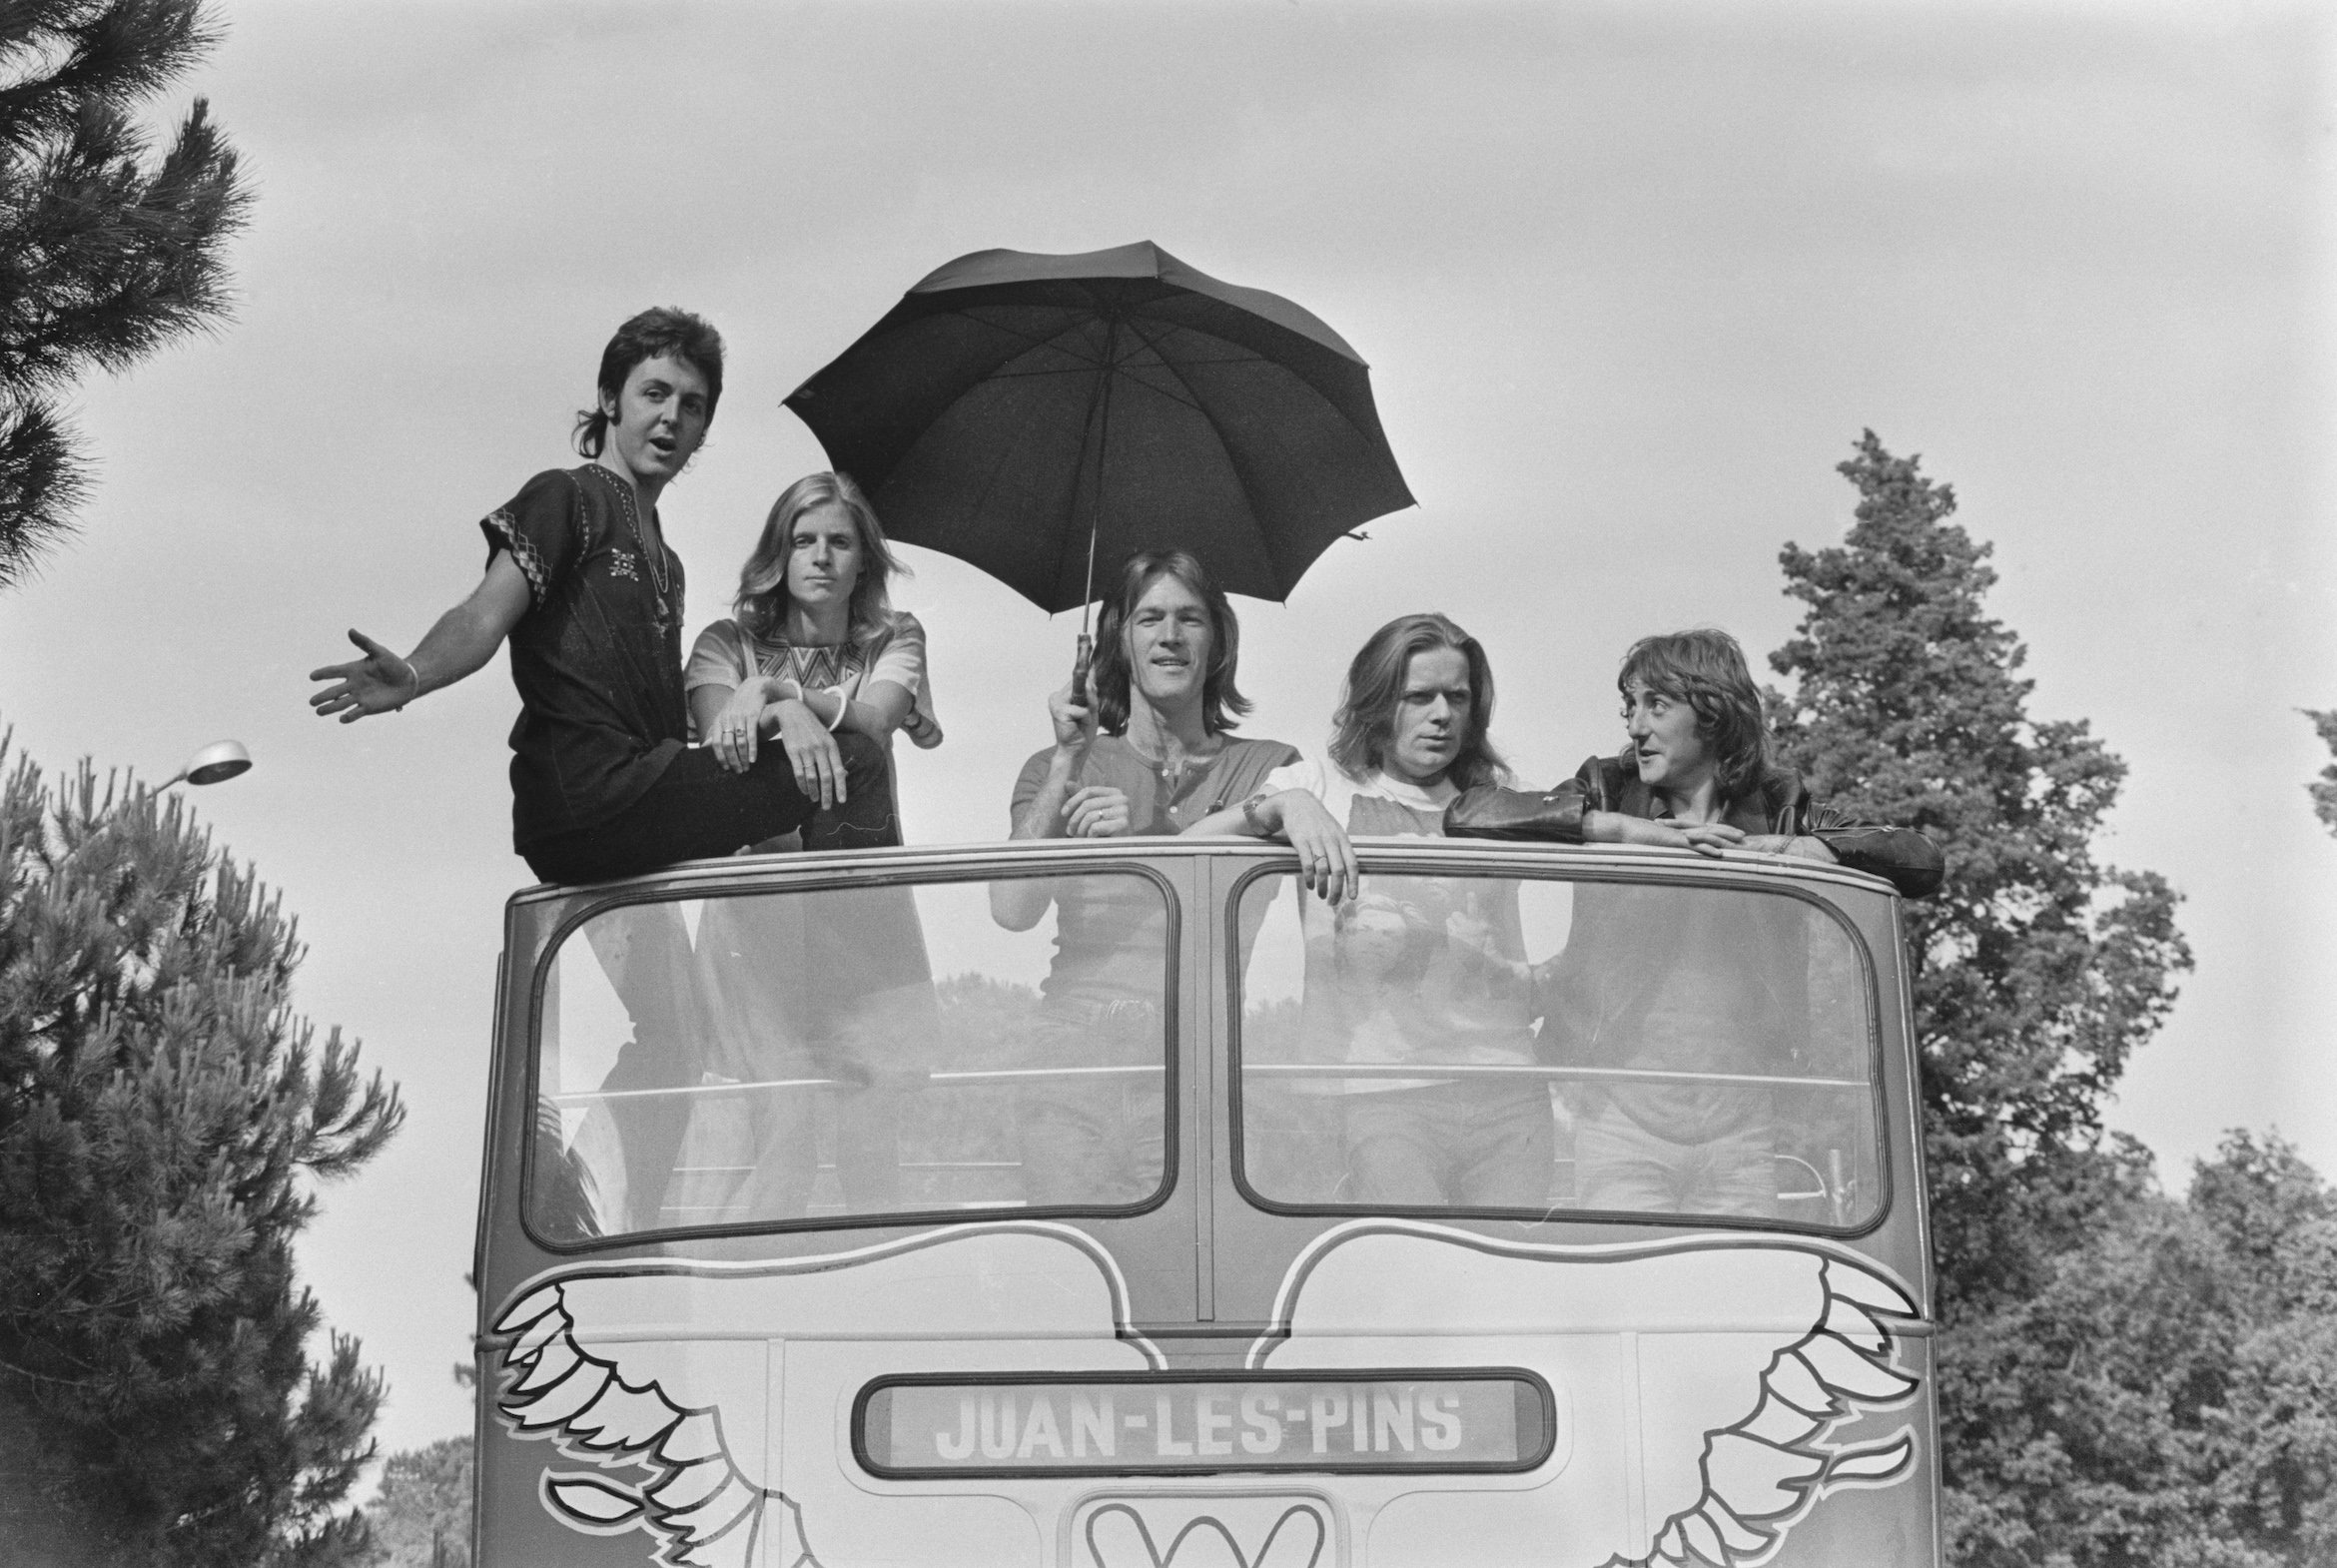 Paul McCartney and Wings pose for a photo on their tour bus on their Wings Over Europe tour